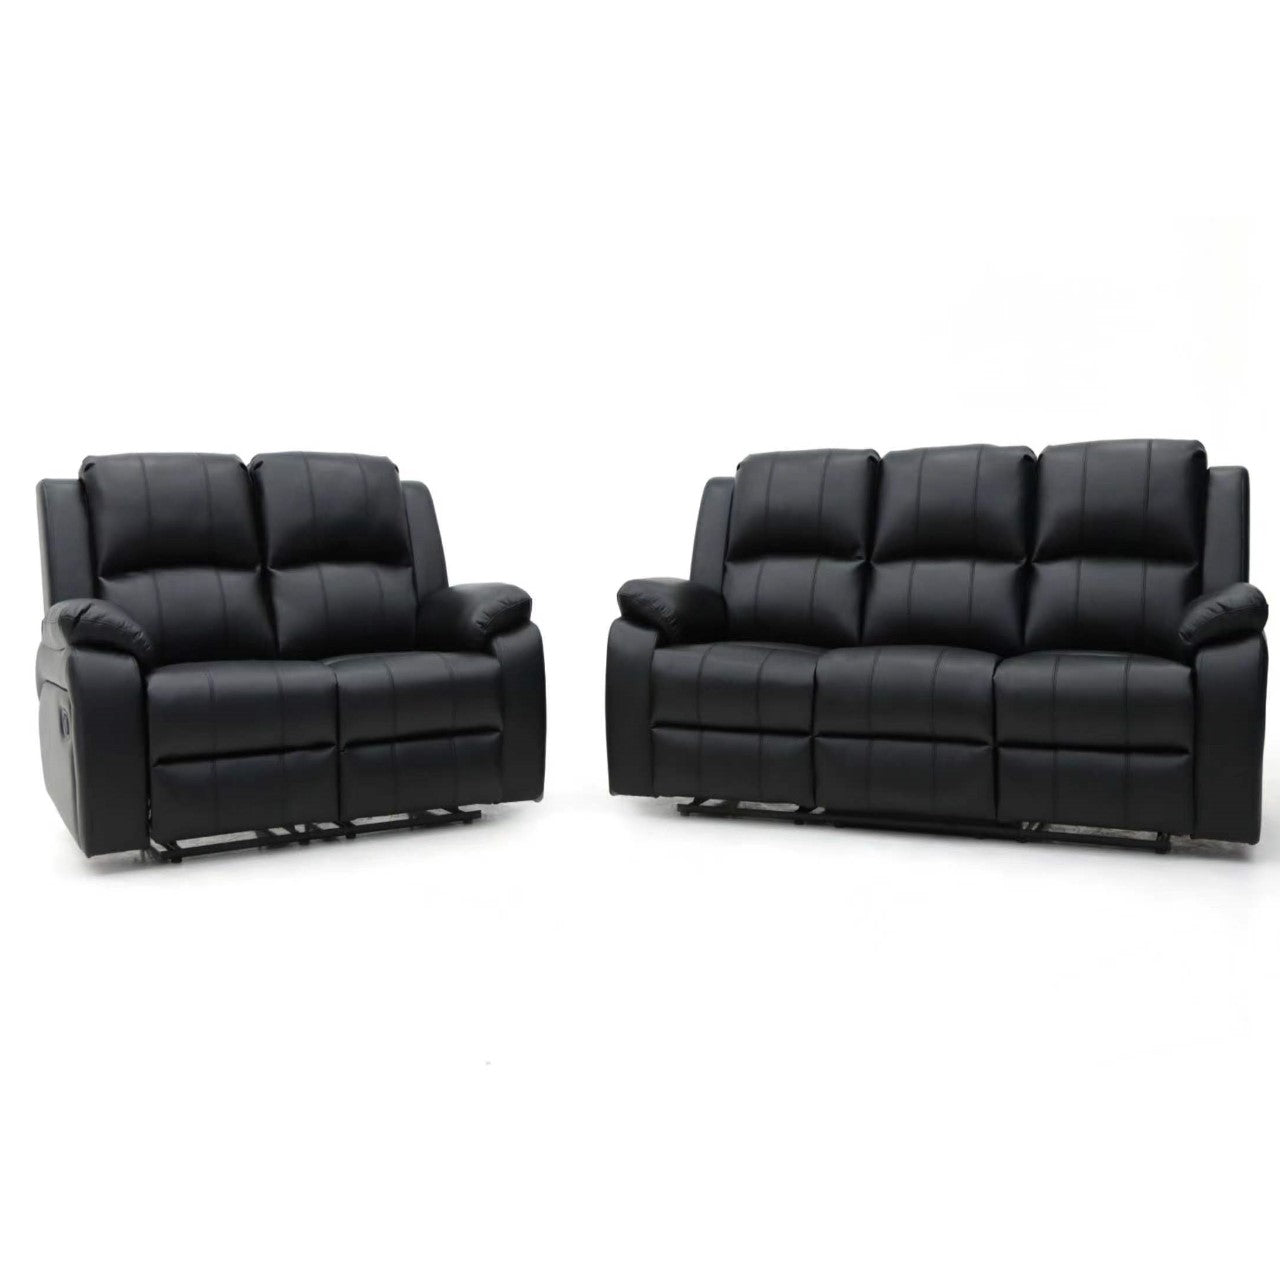 Darwin 3 Seater and 2 Seater Power Recliner Black Leather